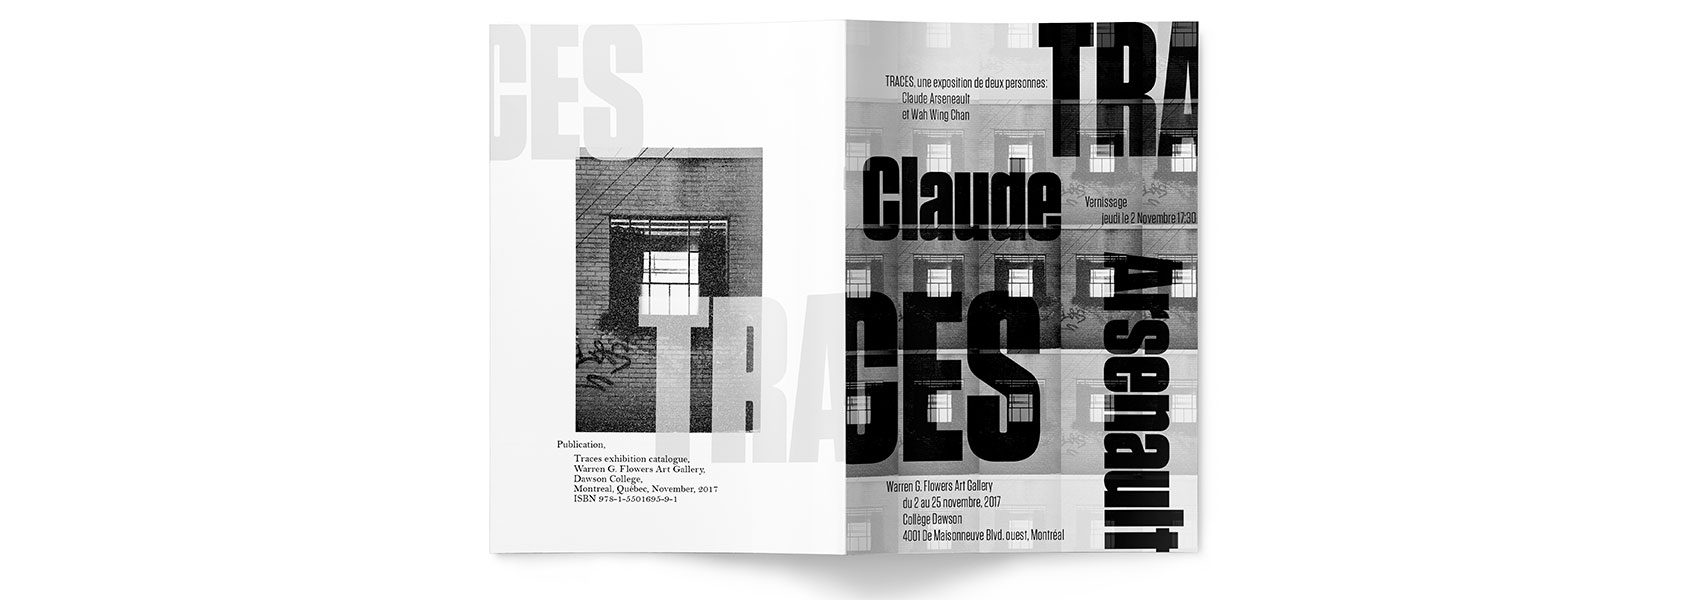 Front and Back Cover of Catalogue featuring Claude Aresenault's Print